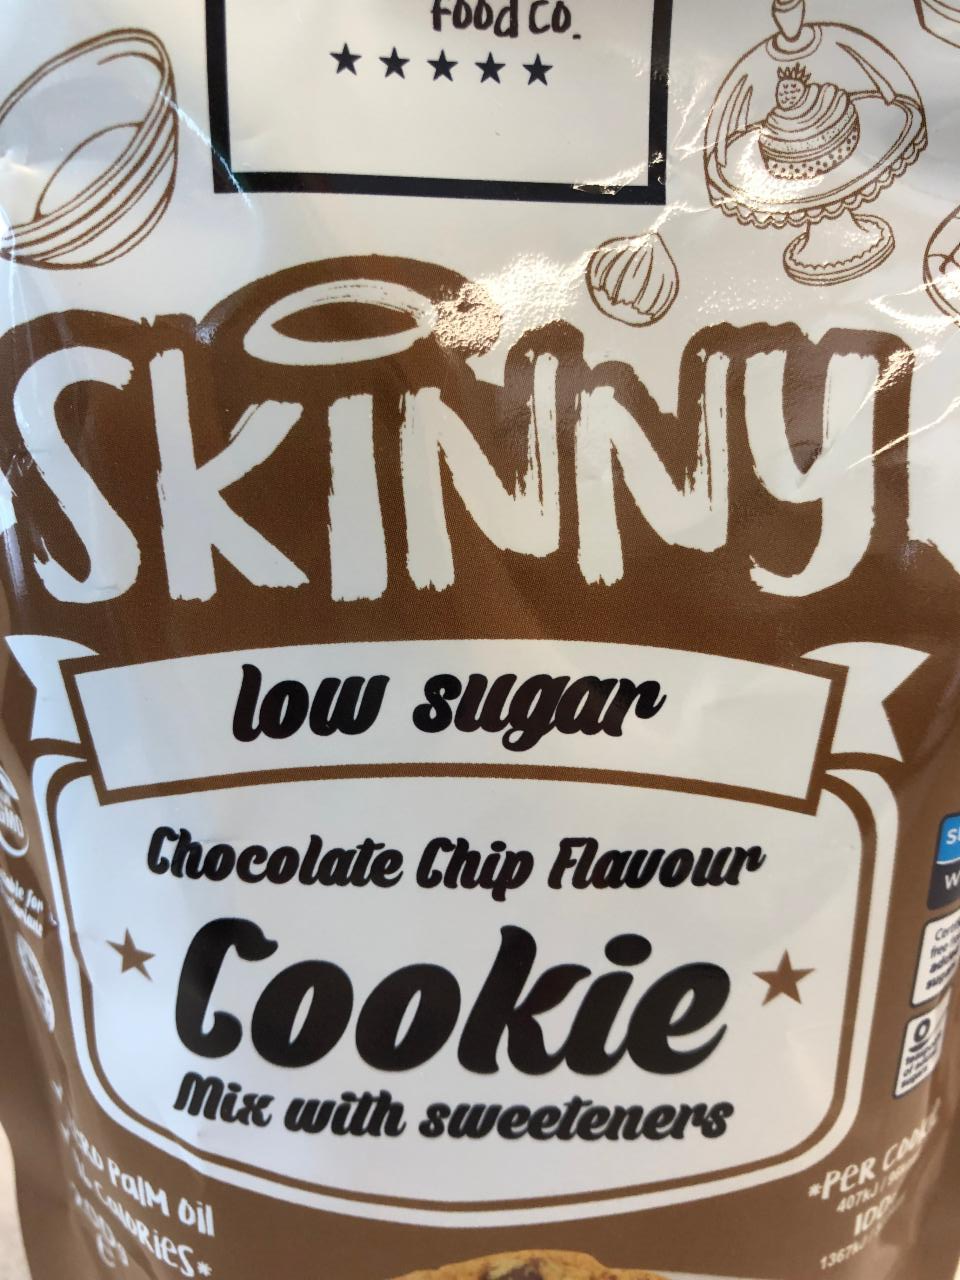 Fotografie - Low sugar Chocolate Chip flavour Cookie Mix with sweeteners Skinny Food Co.